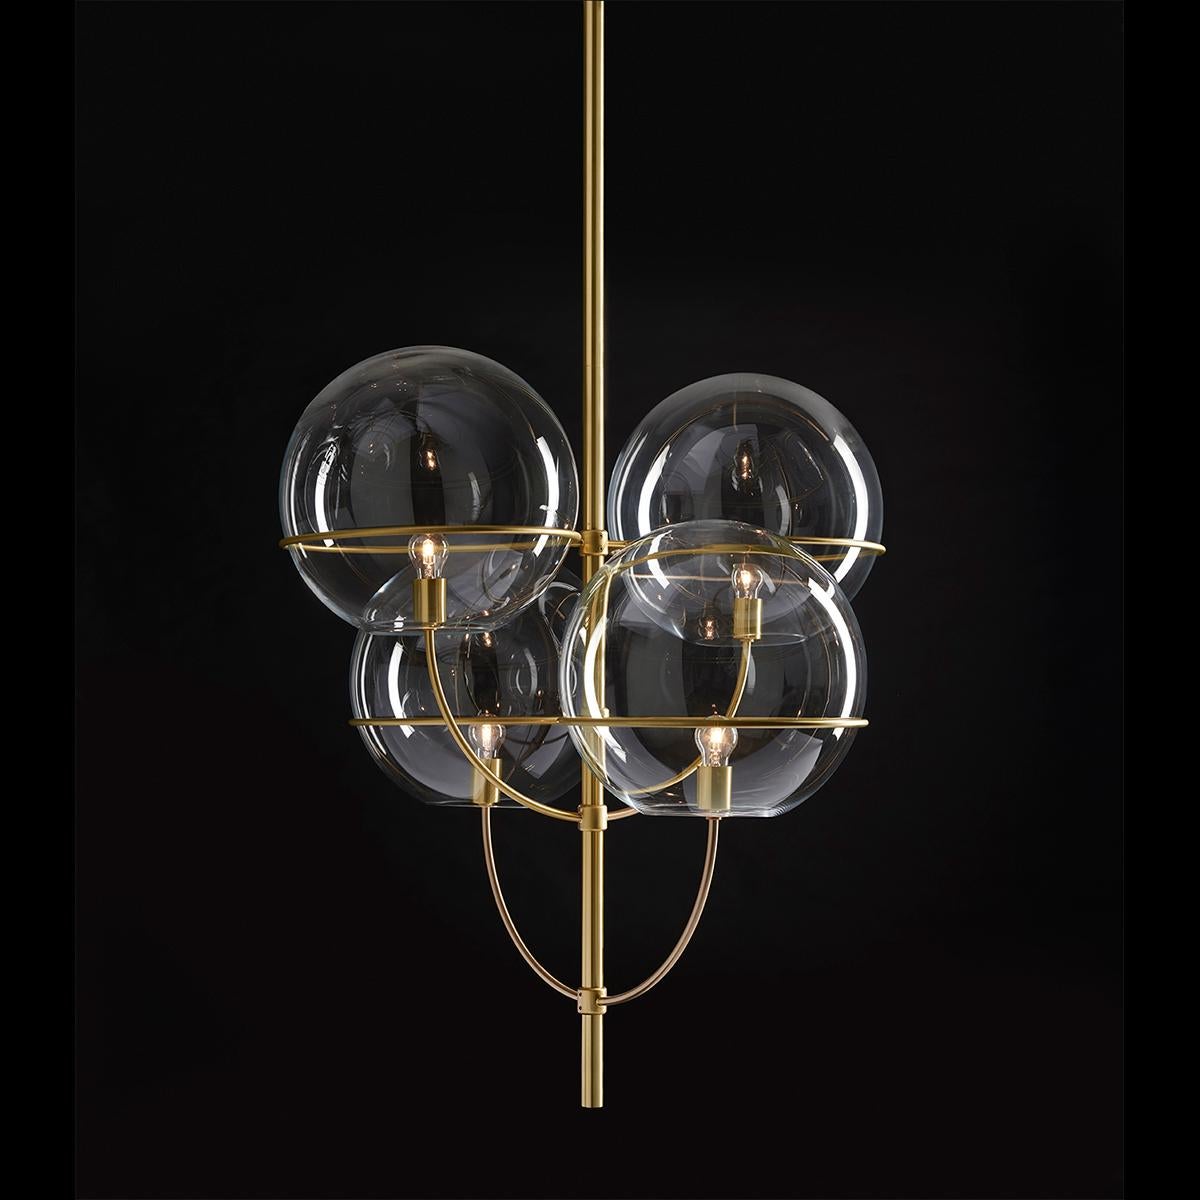 Suspension lamp 'Lyndon' designed by Vico Magistretti in 1977.
Indoor suspension lamp. Metal structure, globes in transparent glass. Manufactured by Oluce, Italy.

Lyndon is a project by Vico Magistretti created in 1977 and developed over the